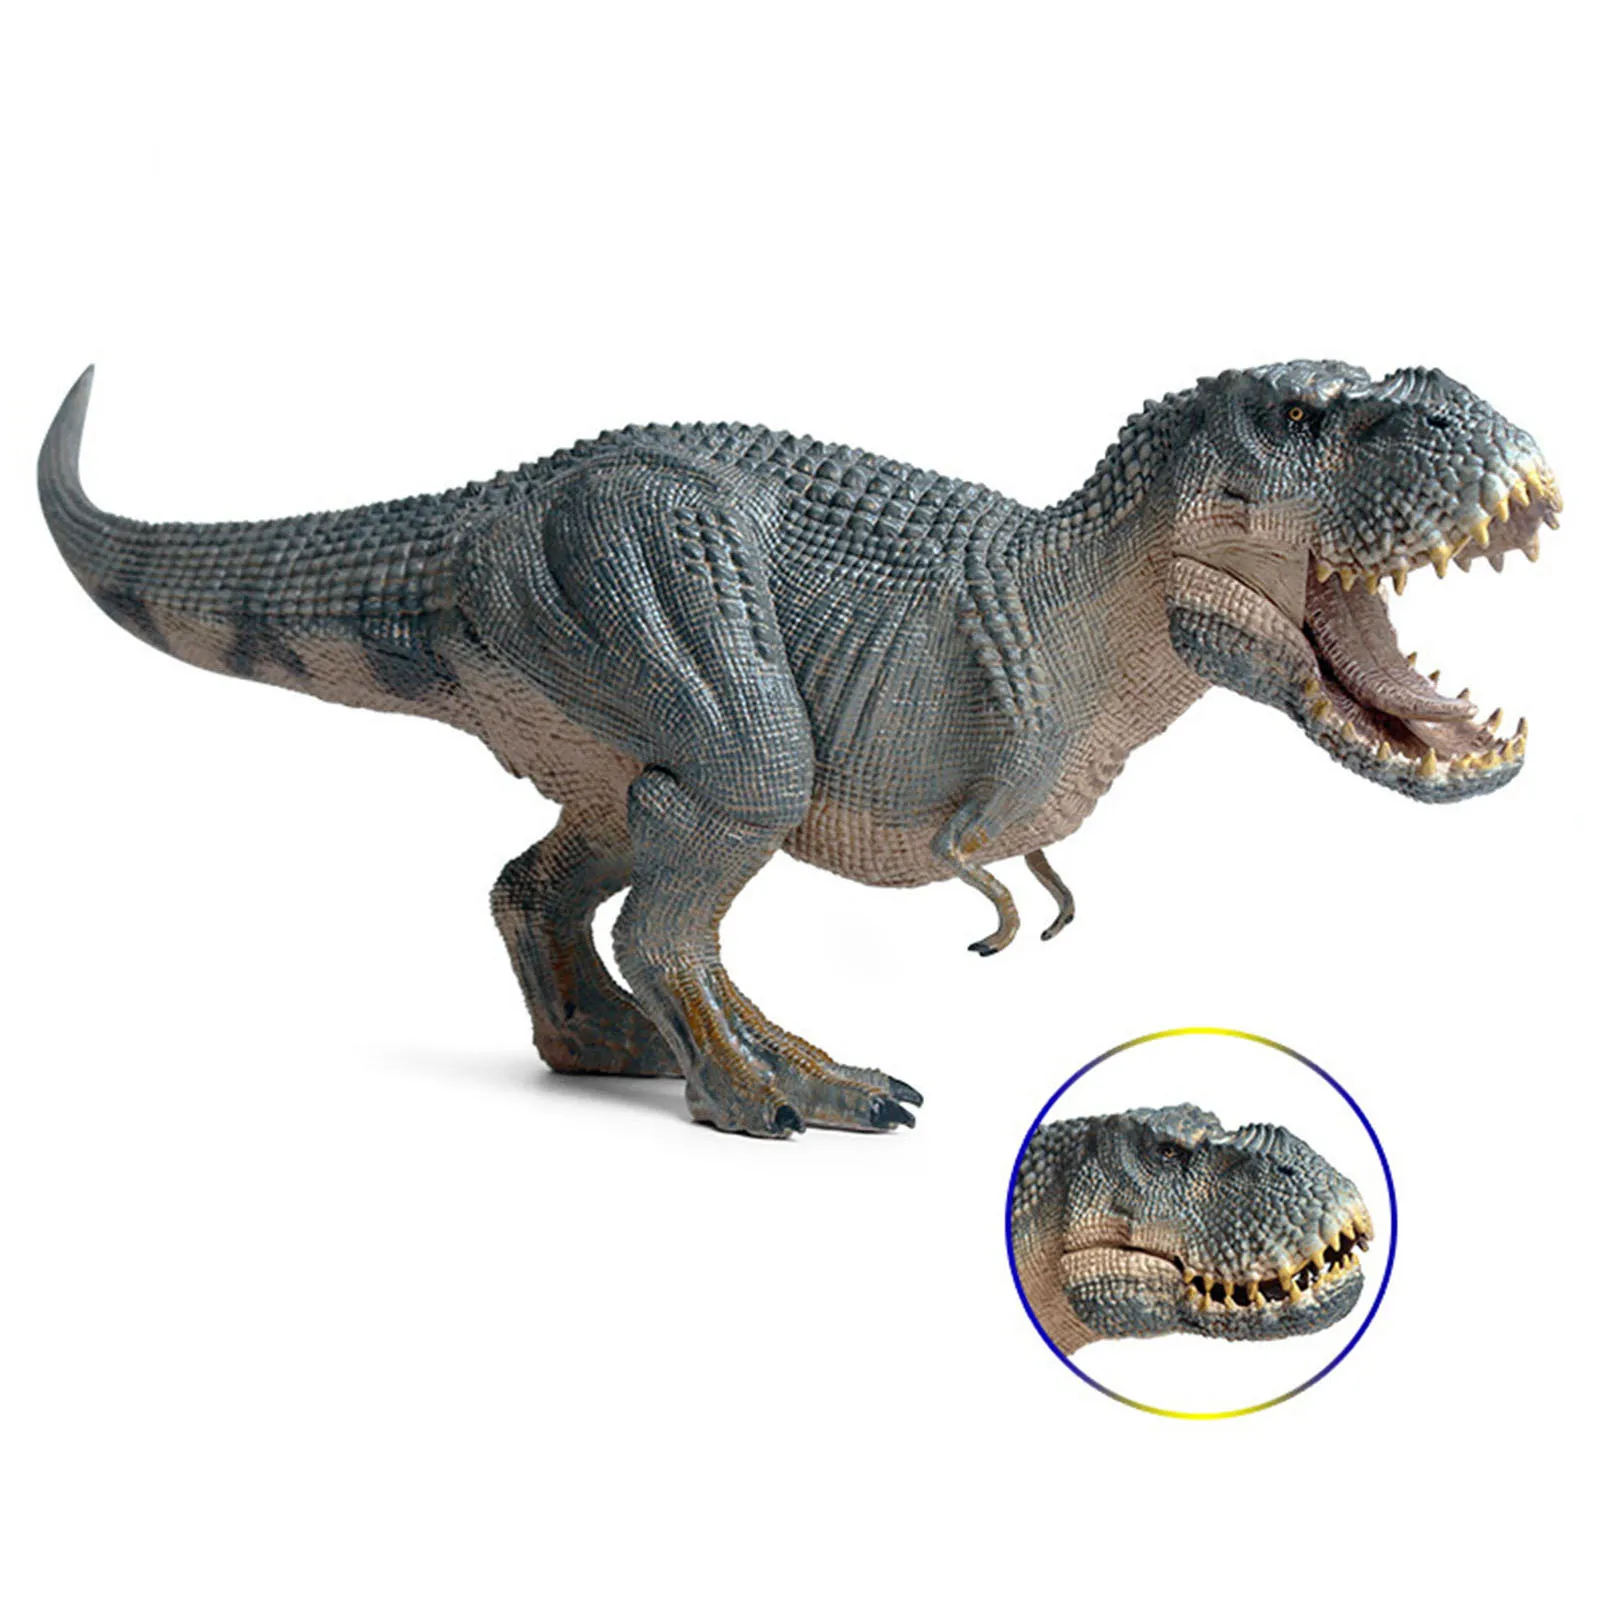 

T Rex Dinosaur Figure Genetically Modified Raptor Dino Model Toy For Kids Gift Games Toys